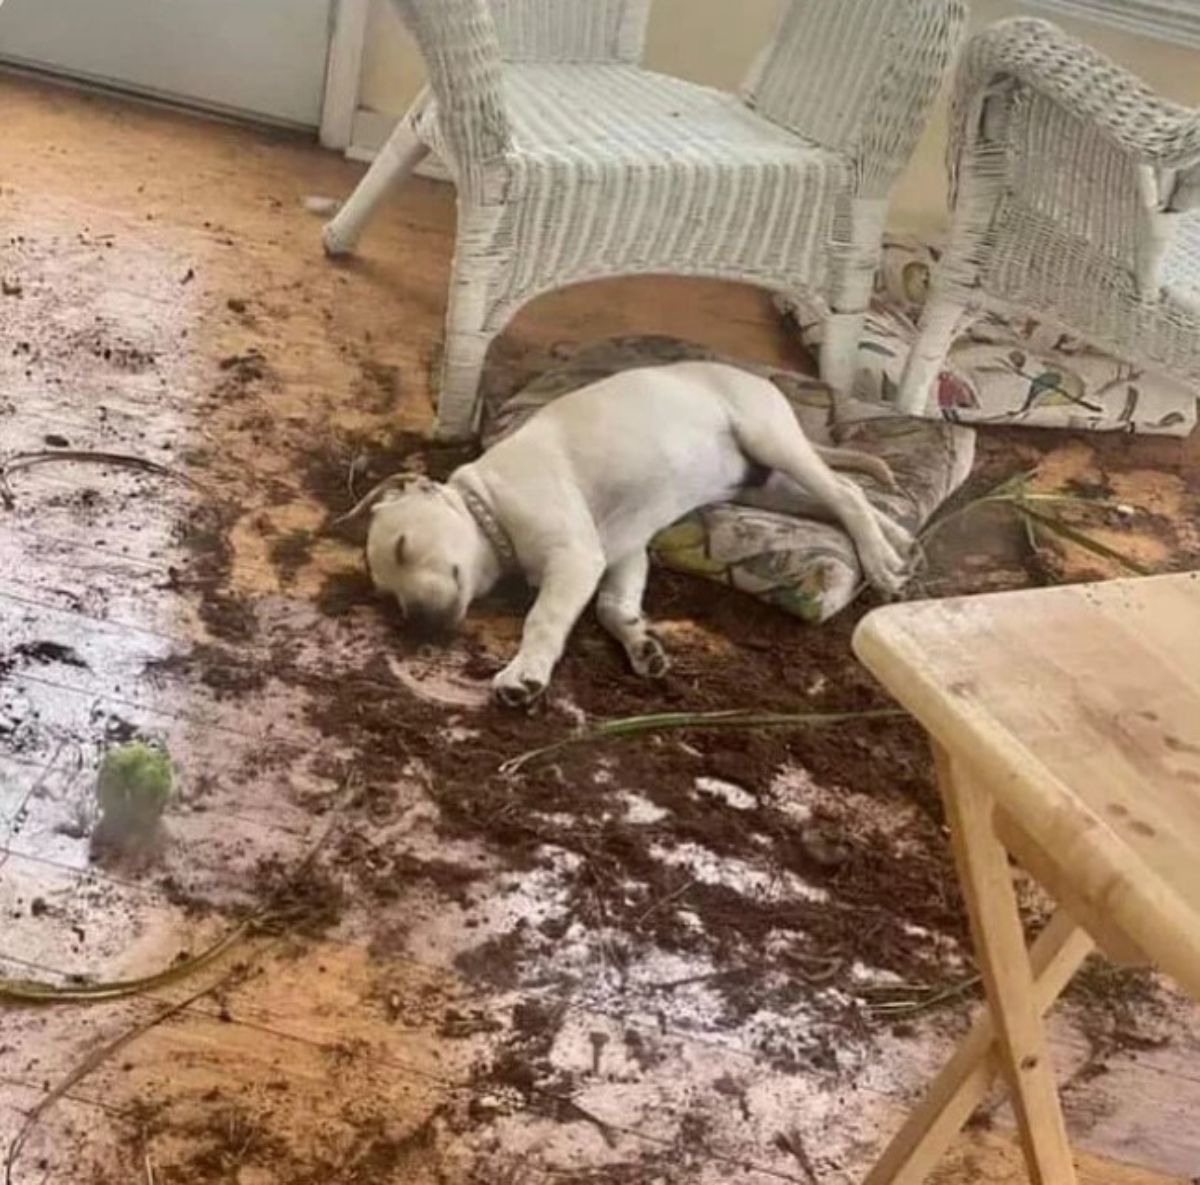 white puppy sleeping on the floor on soil from a broken plant pot all over the floor with cushions on the floor as well